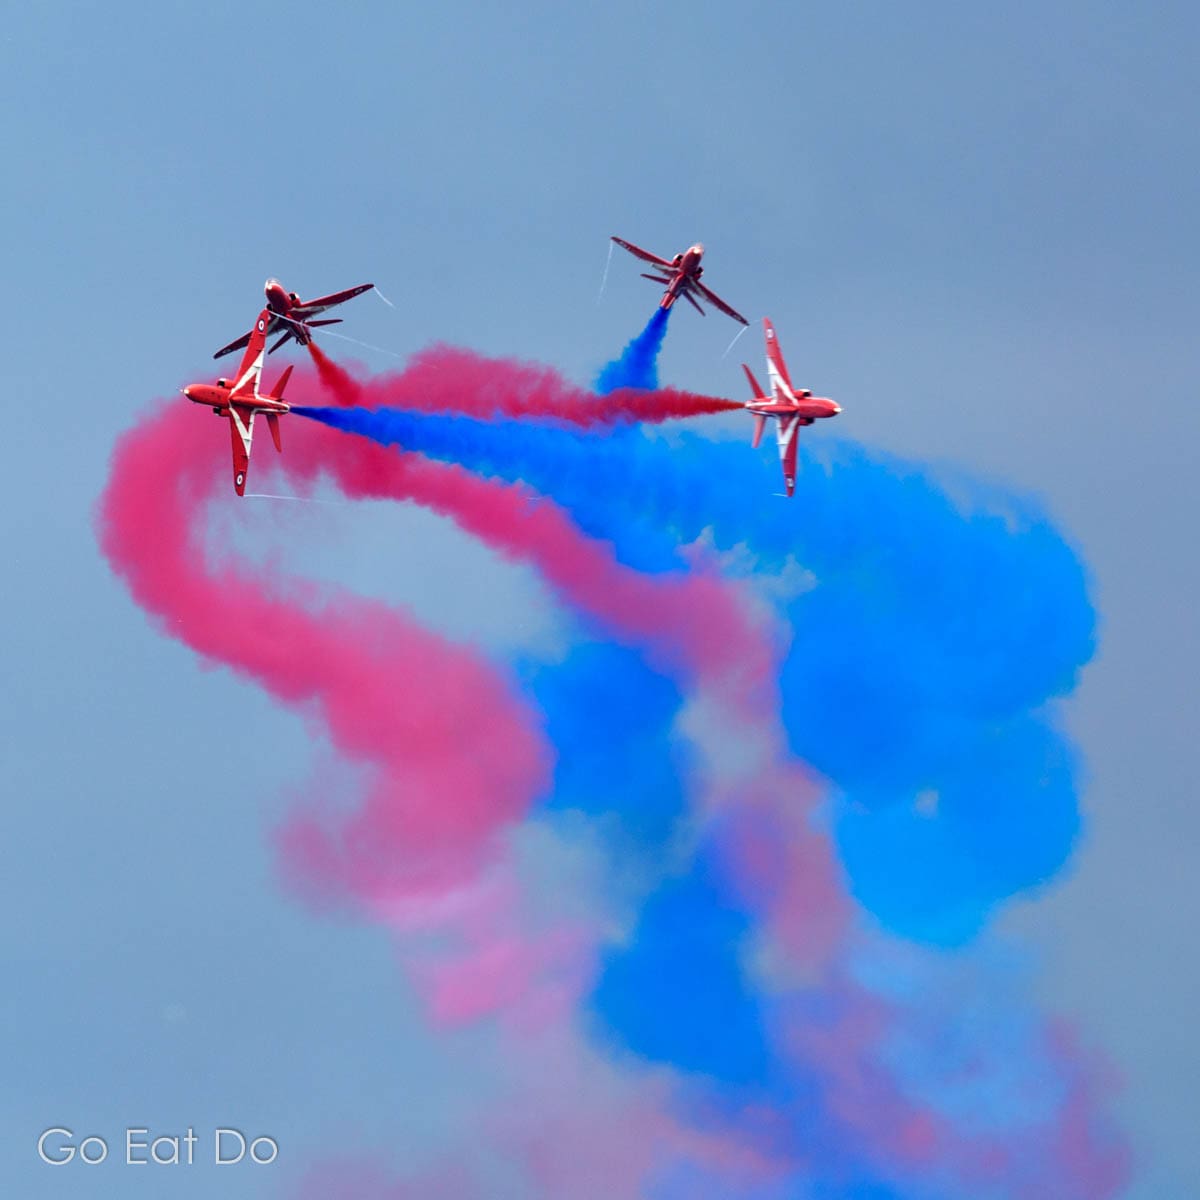 The Red Arrows trailing blue and red vapour as they break formation.